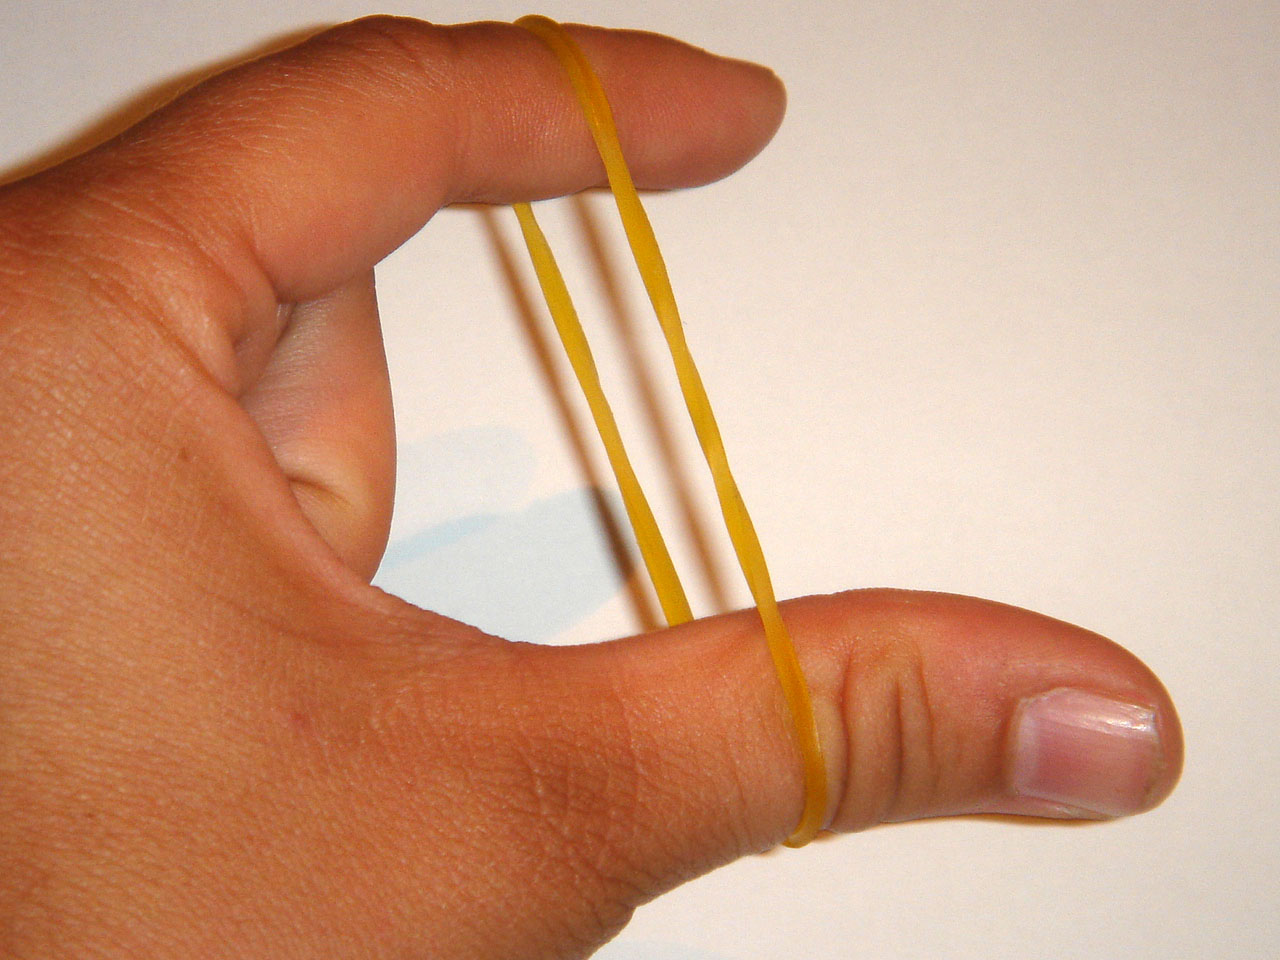 This rubber band